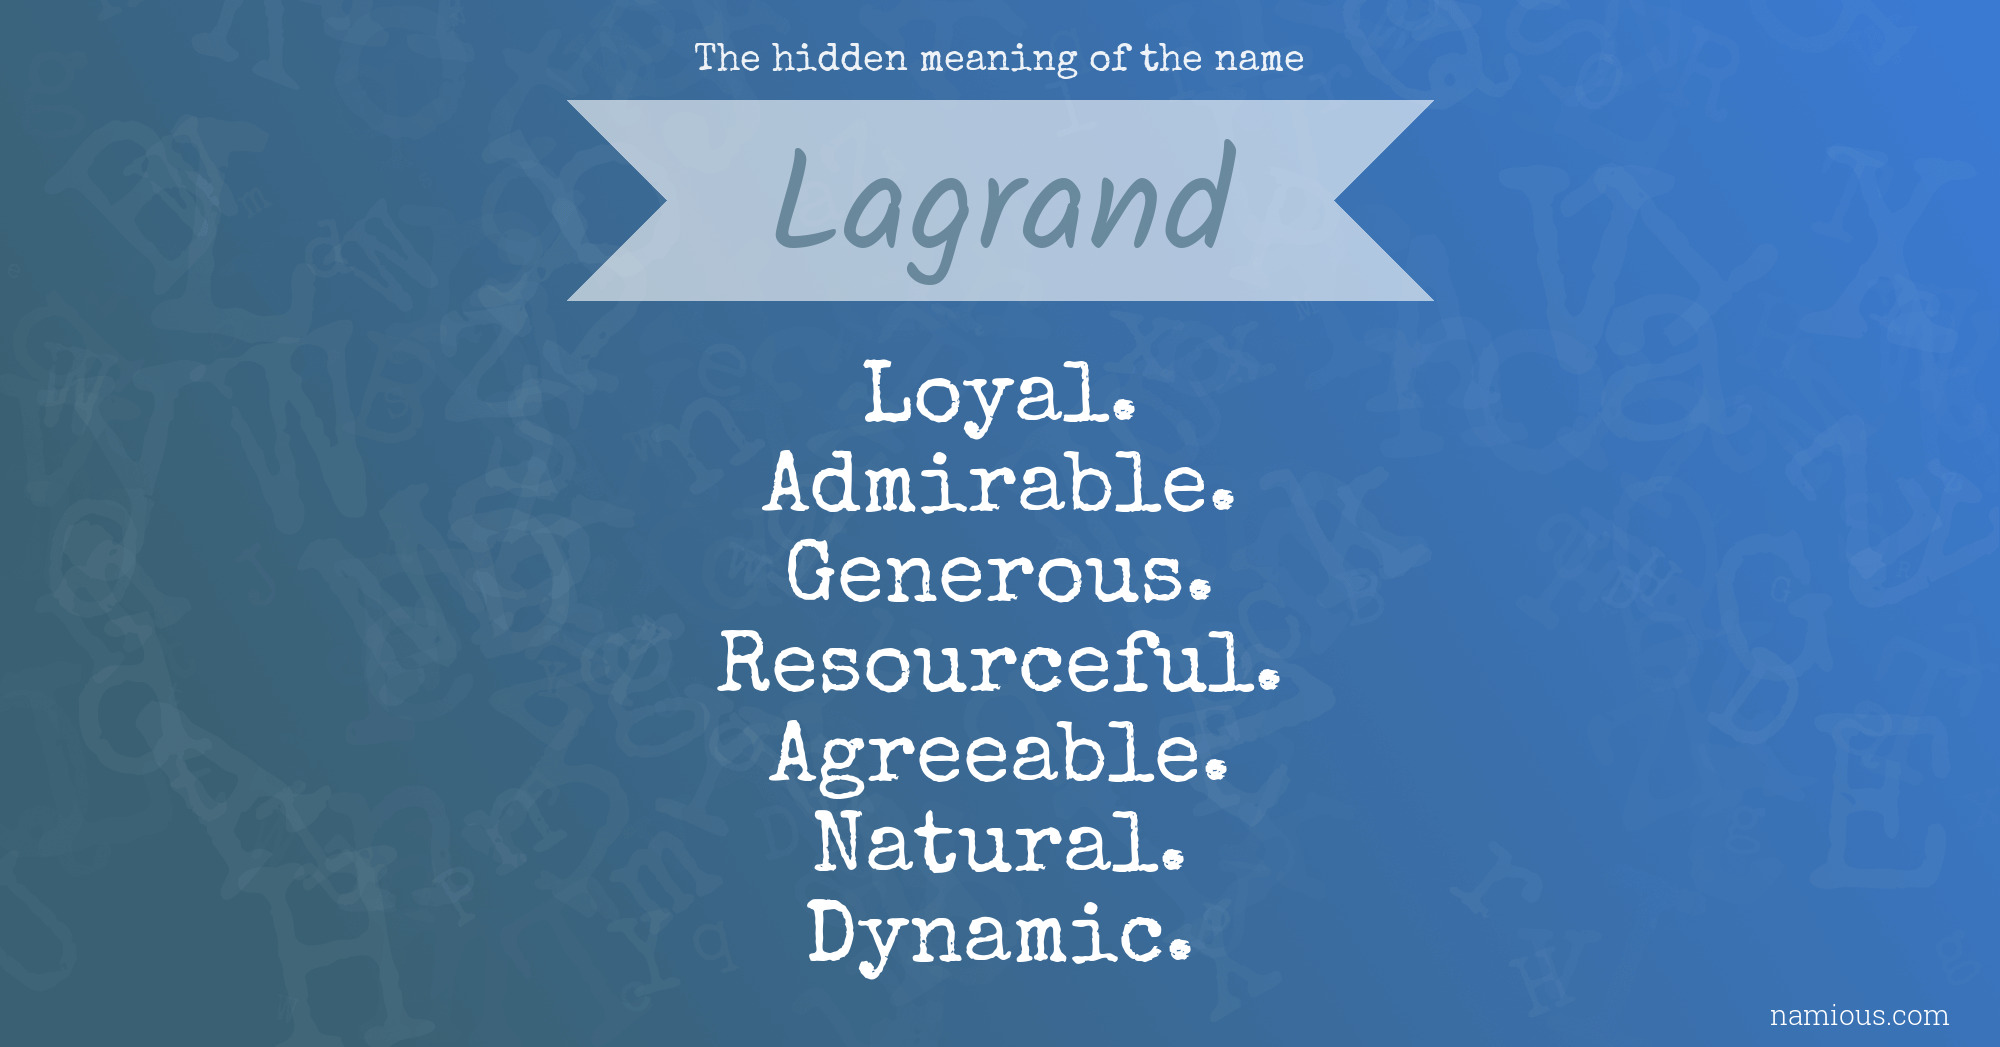 The hidden meaning of the name Lagrand